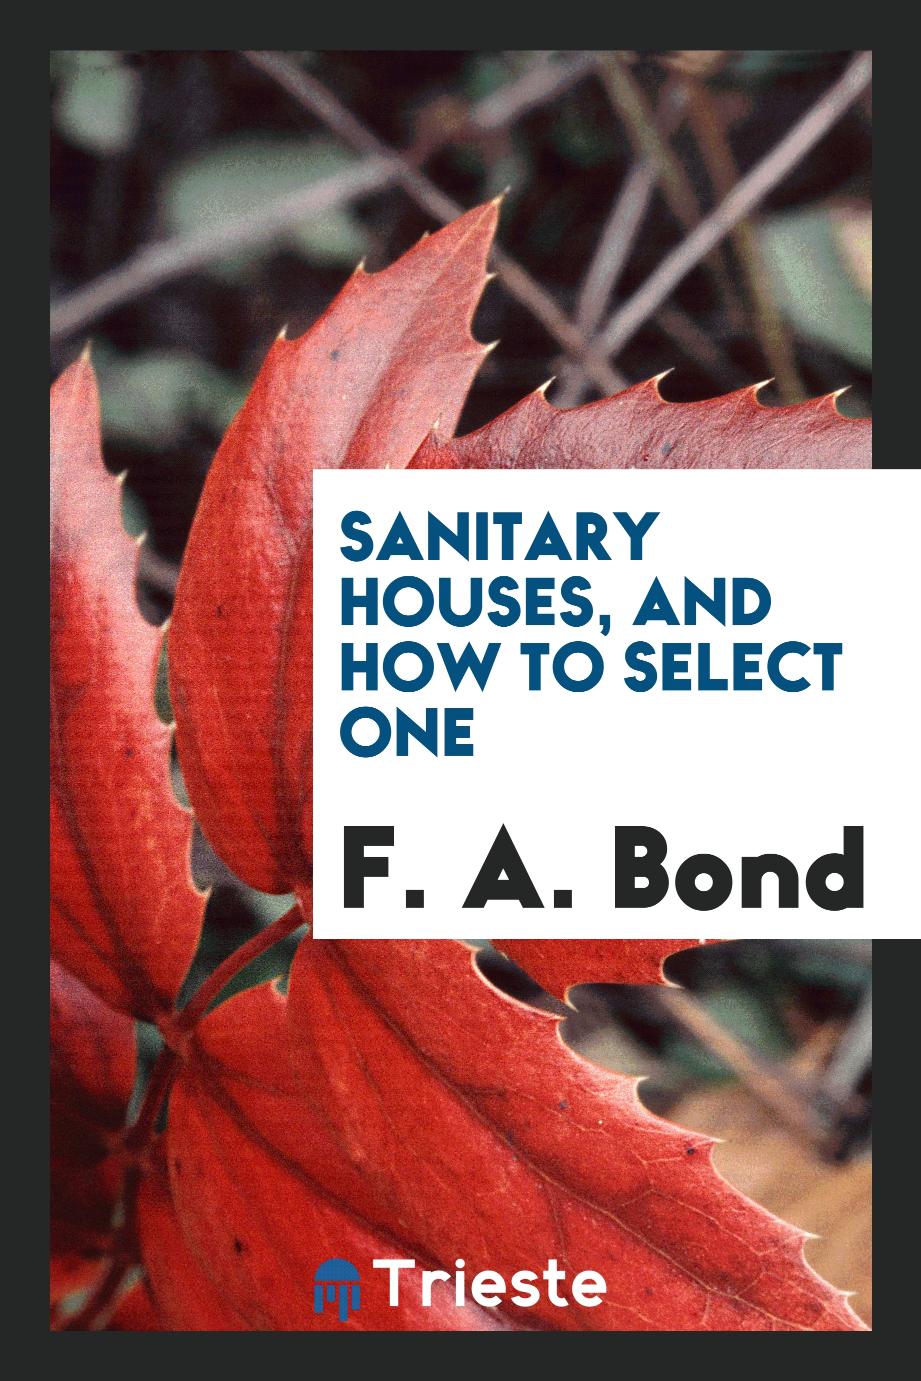 Sanitary houses, and how to select one